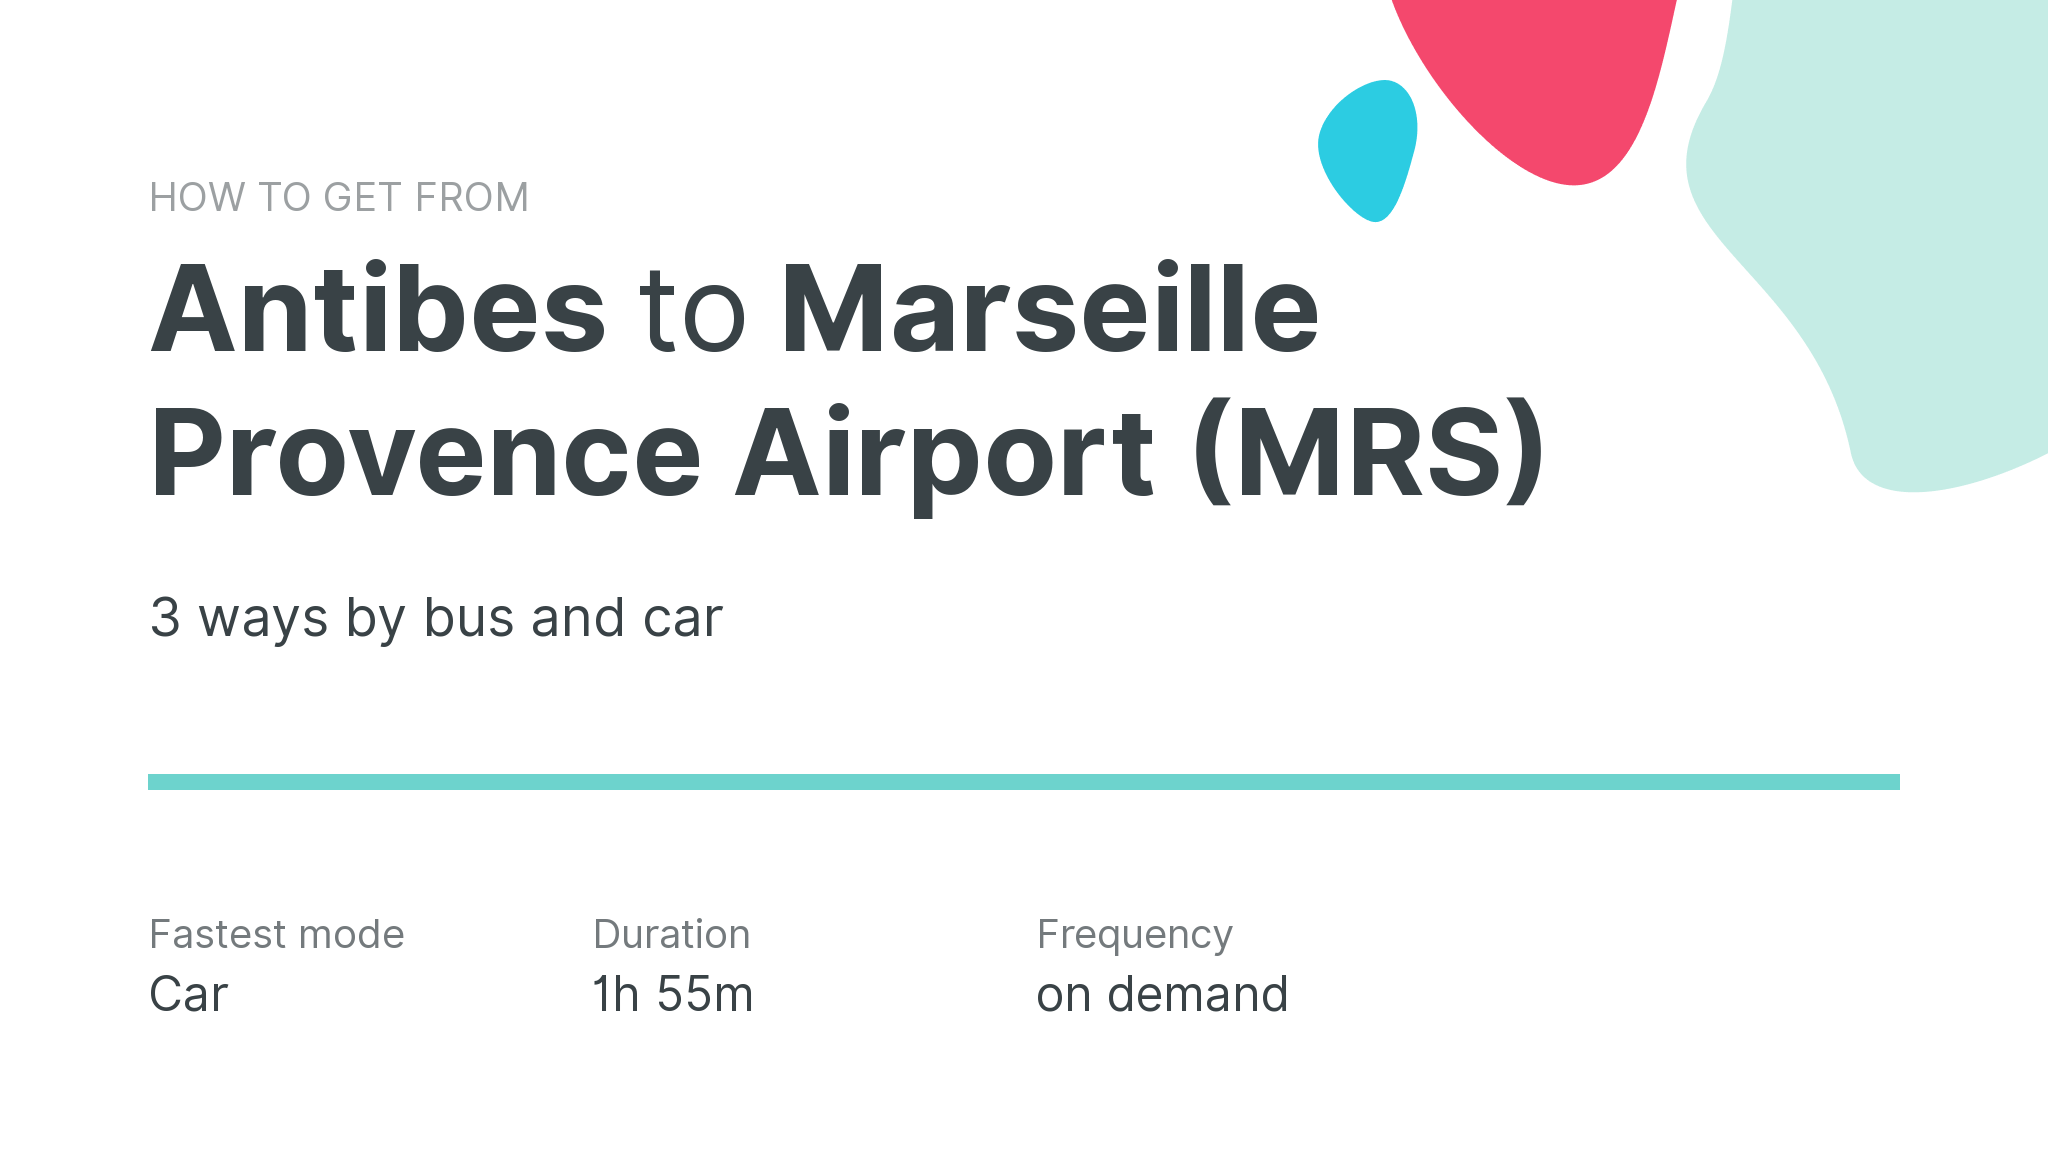 How do I get from Antibes to Marseille Provence Airport (MRS)